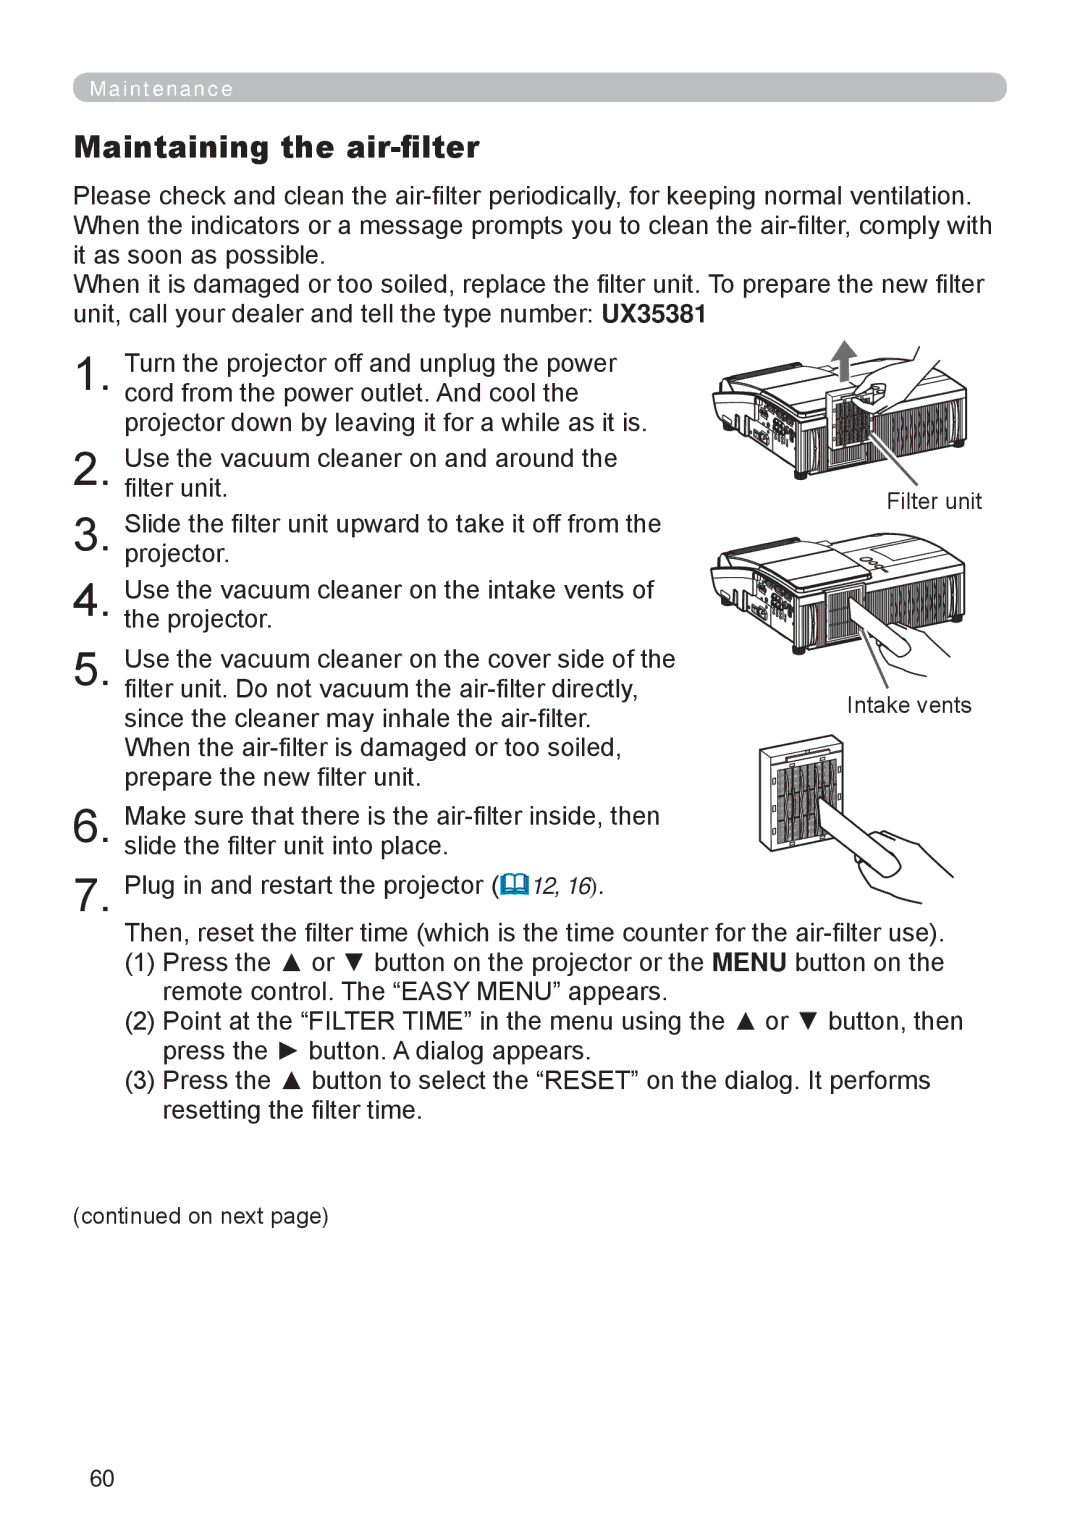 Apple ED-A111, ED-A101 manual Maintaining the air-filter, Filter unit Intake vents 